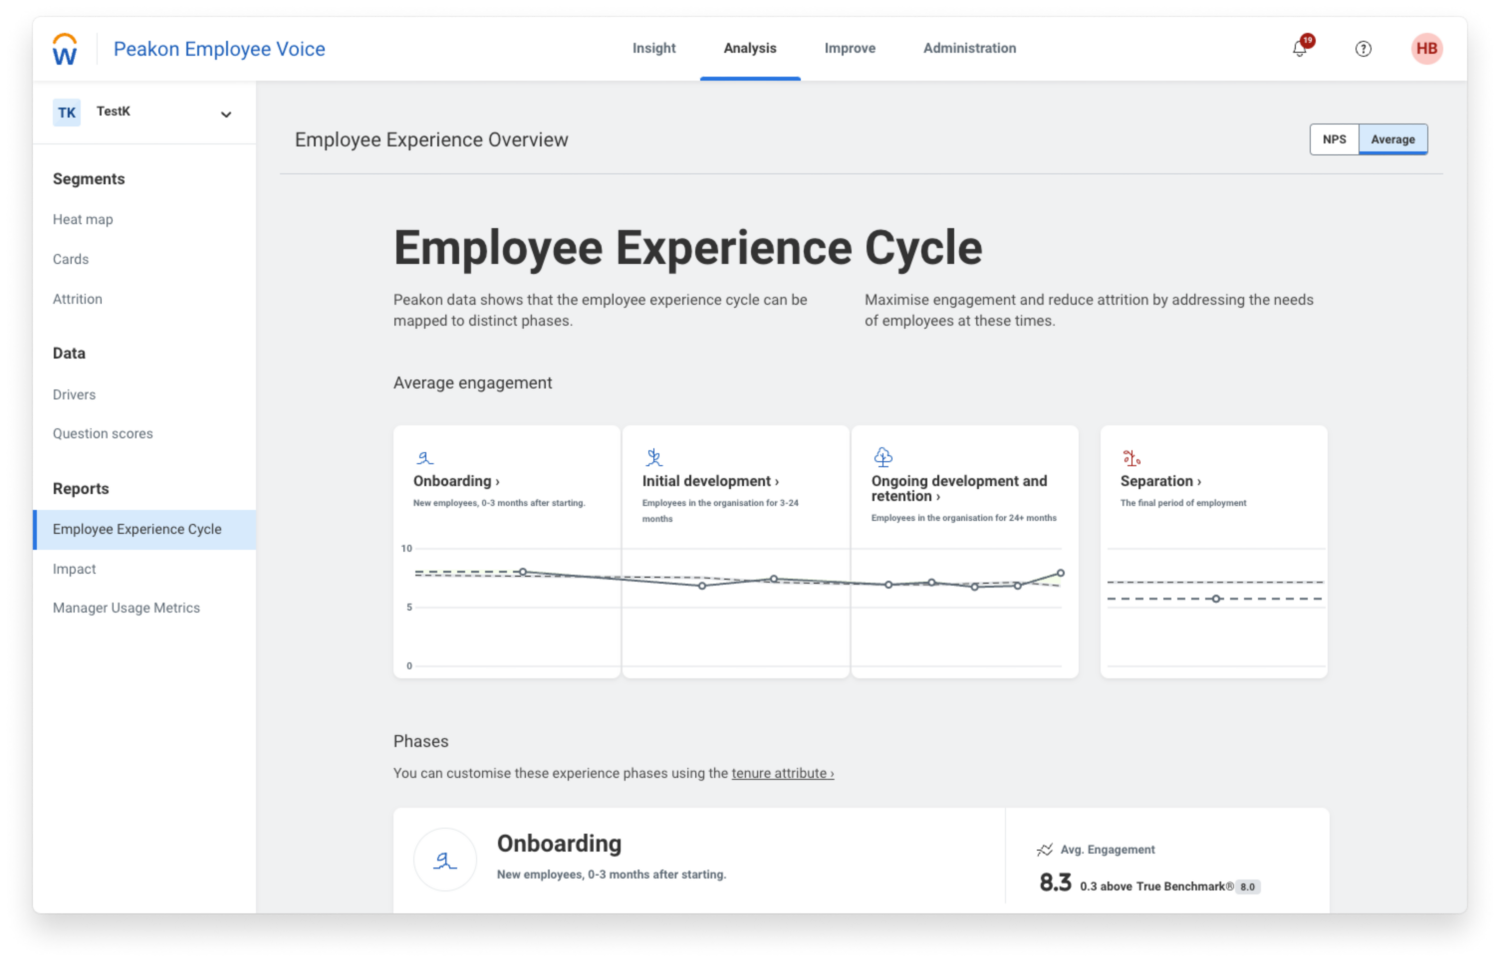 Screenshot from Workday Peakon Employee Voice showing employee experience cycles.